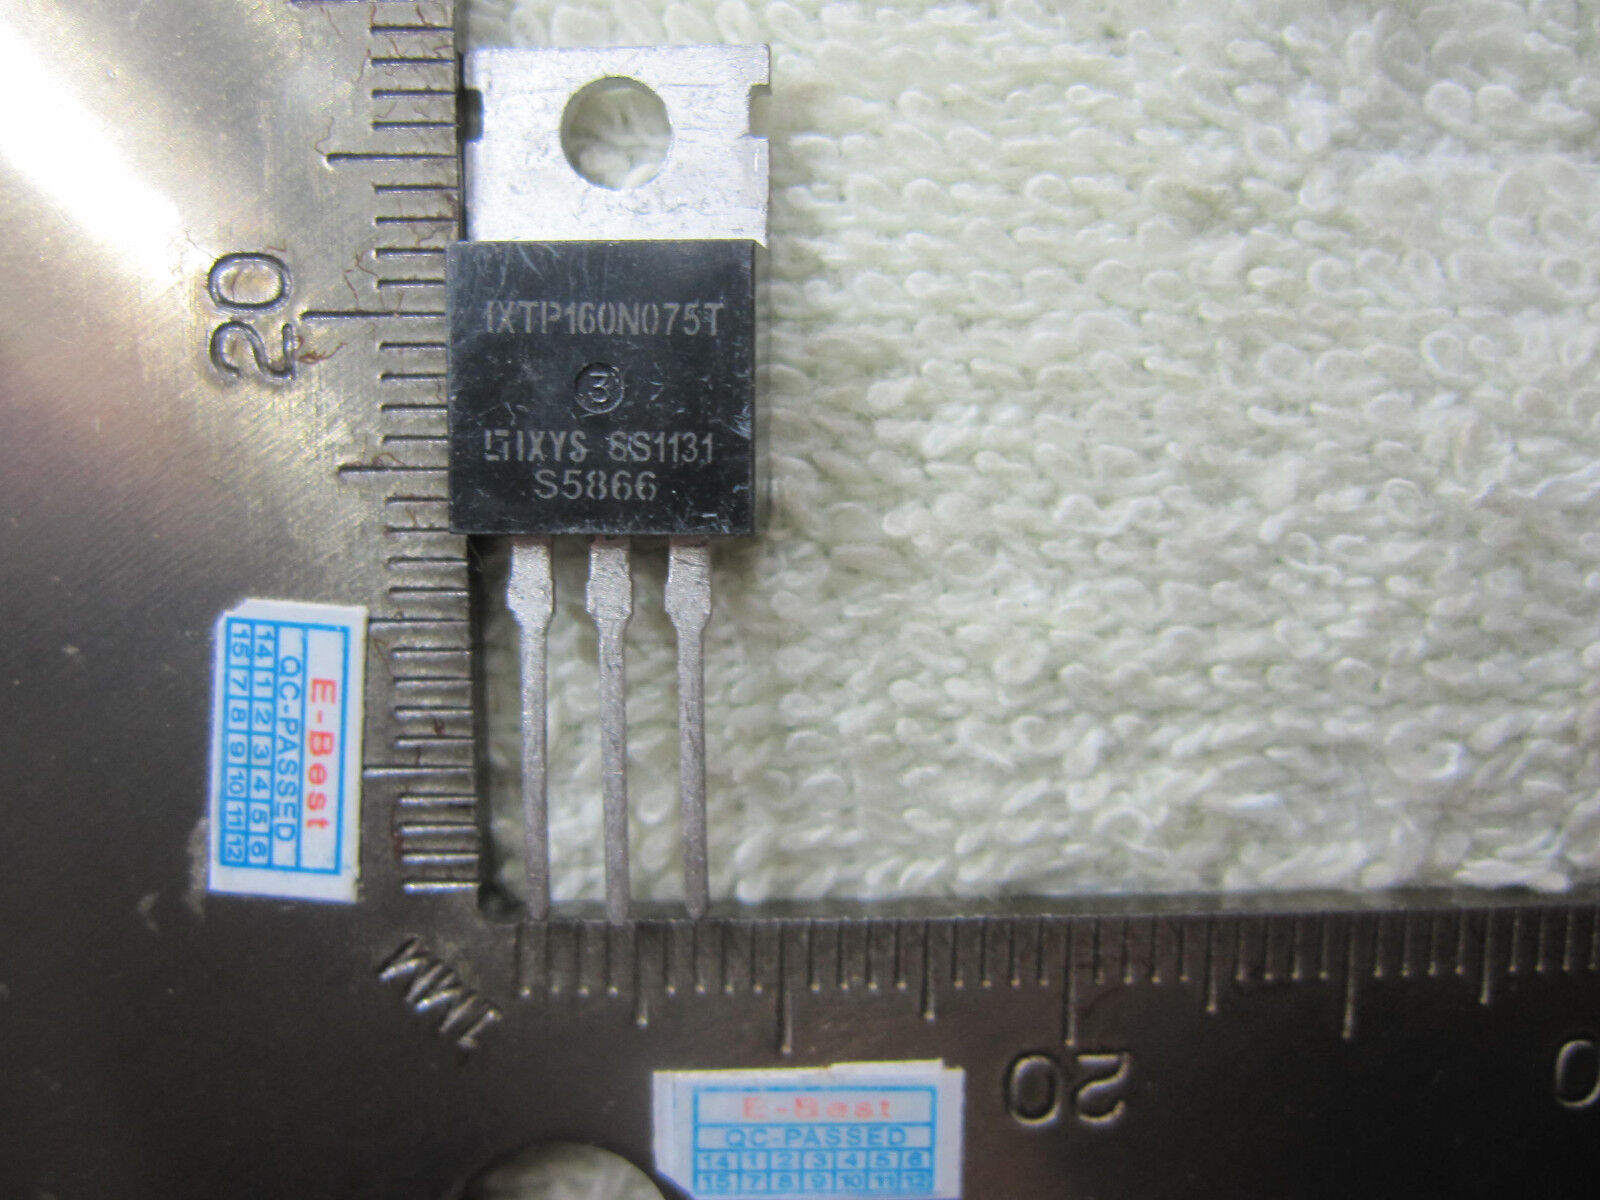 2pcs IXTPI60N075T IXTP16ON075T IXTP160NO75T IXTP160N07ST IXTP160N075T TO220-3